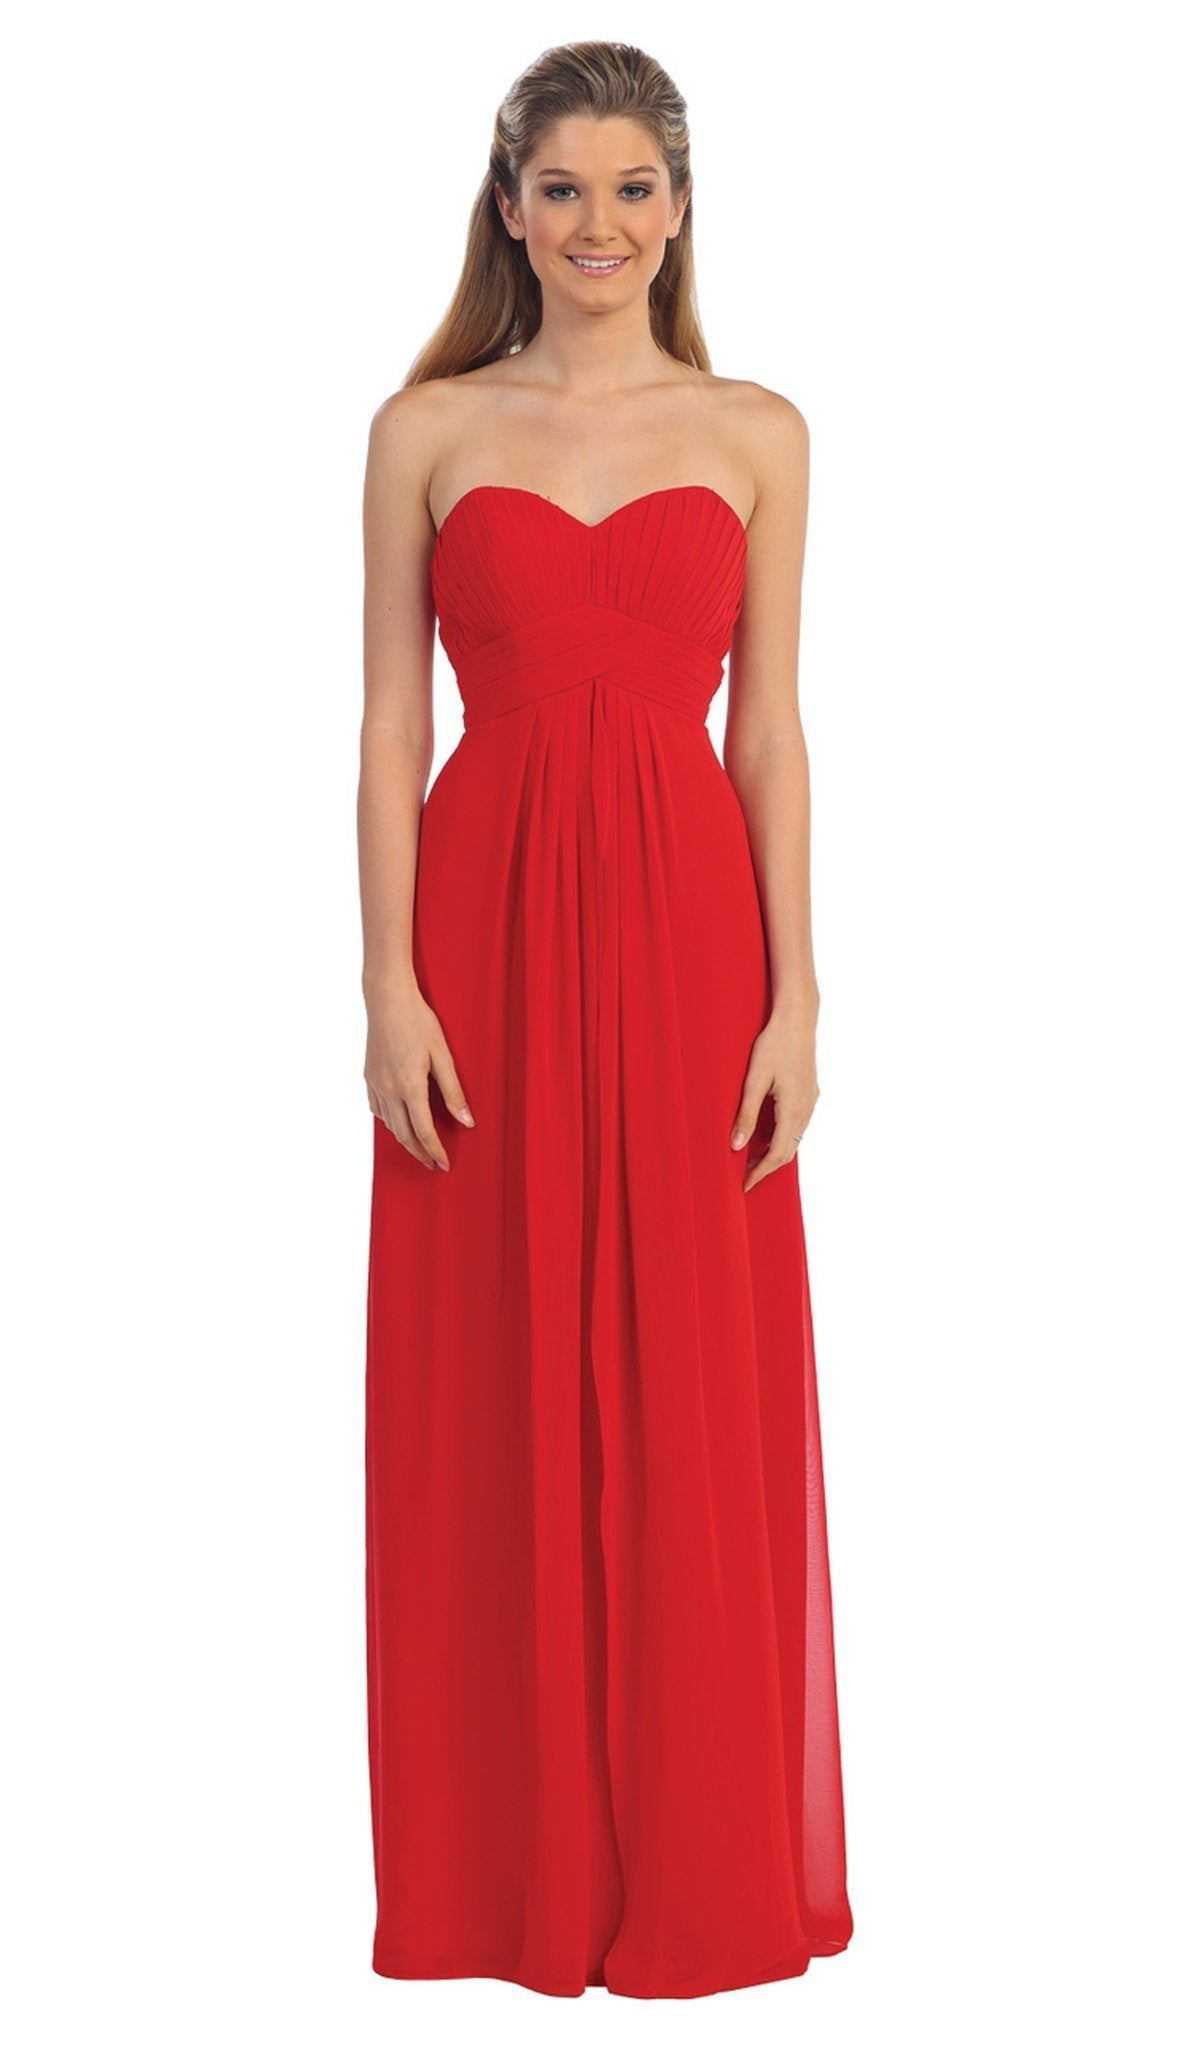 Dancing Queen - 8658 Strapless Chiffon Empire Long Prom Dress Special Occasion Dress XS / Red